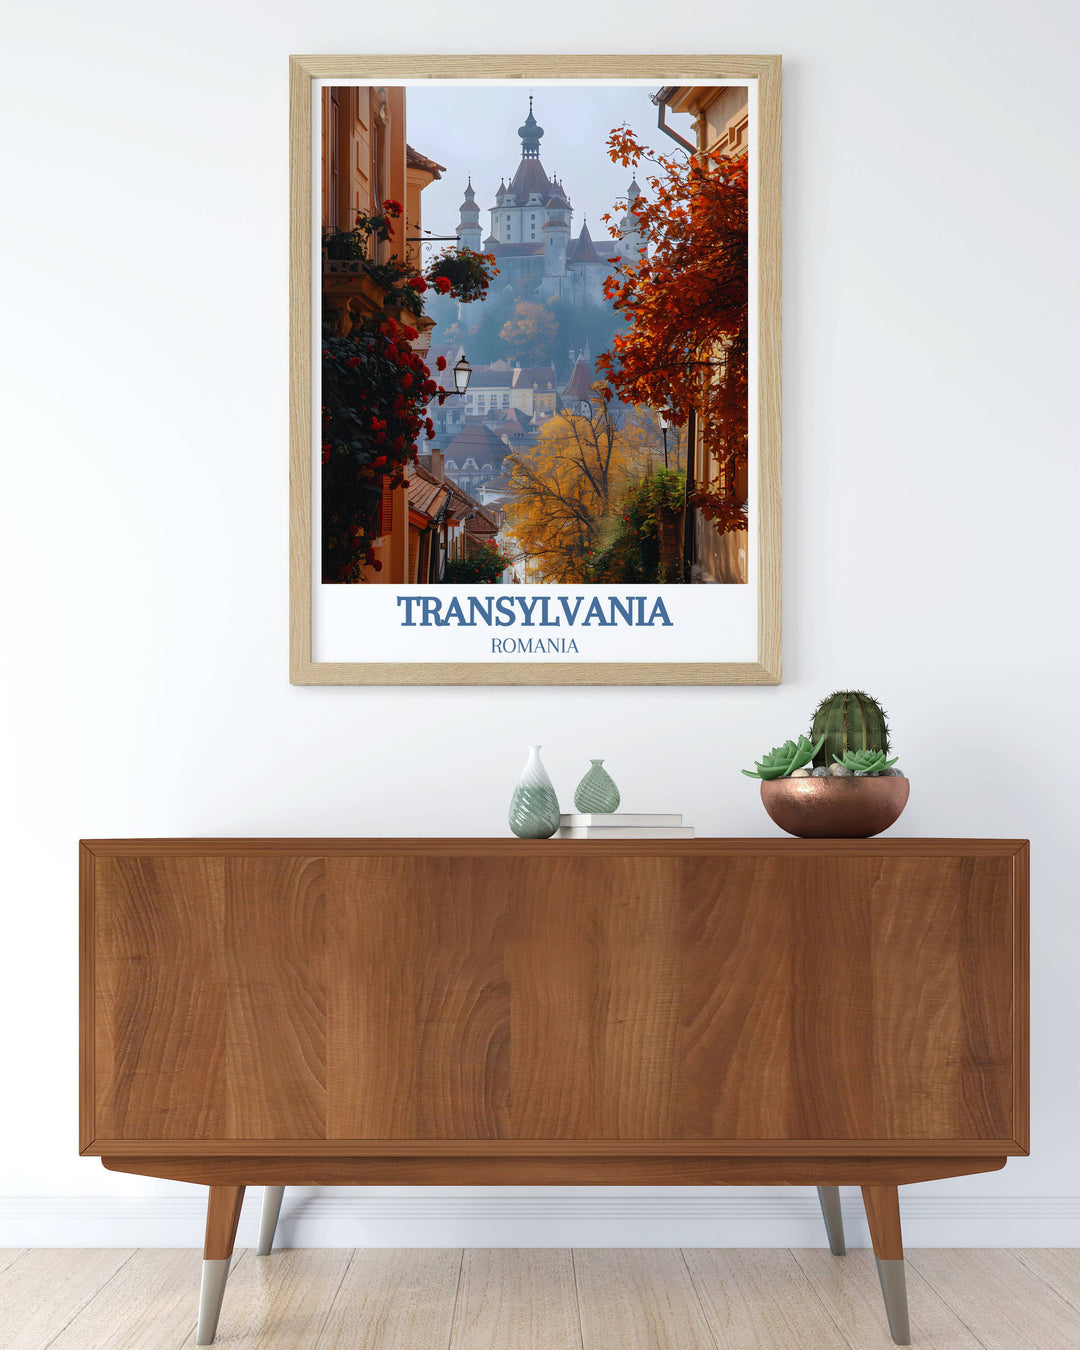 Modern wall decor featuring the iconic Sighișoara Citadel, blending historical elements with contemporary design to create a stunning piece that elevates any living space.